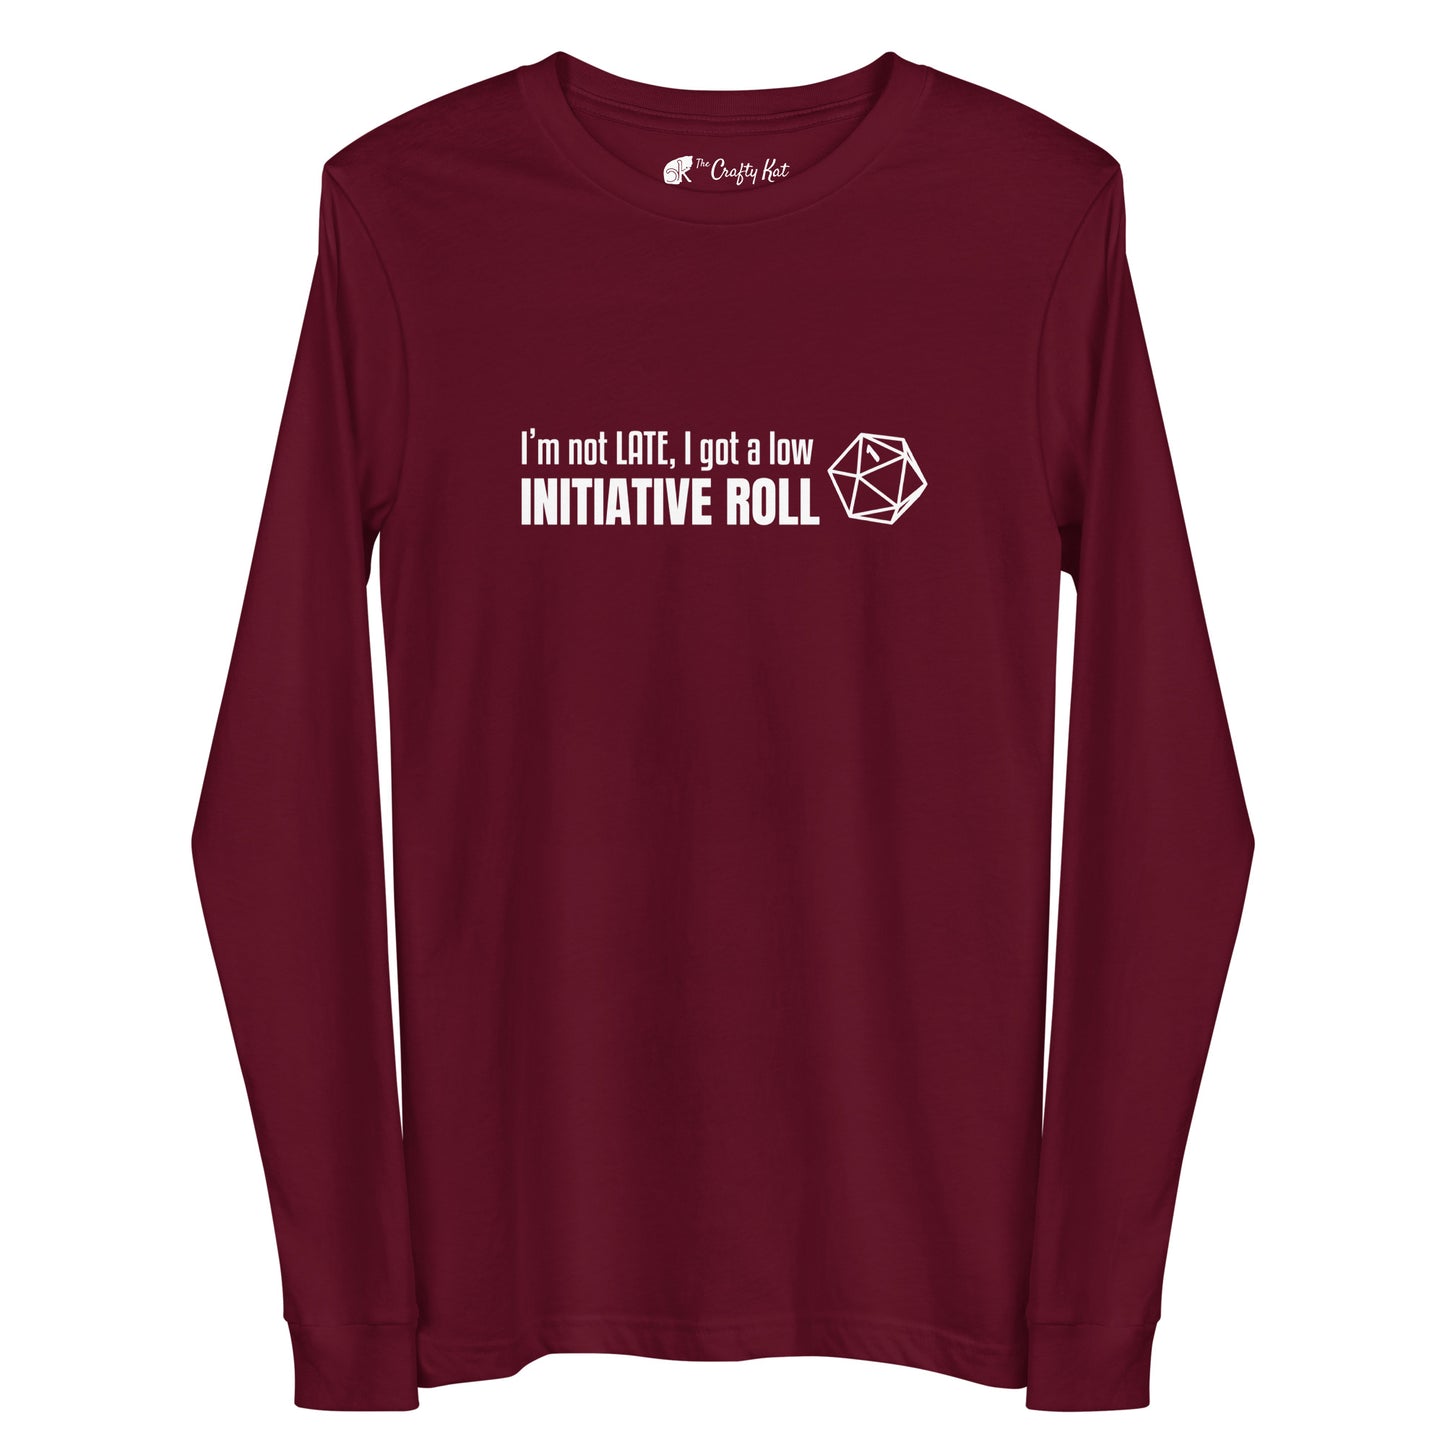 Maroon long-sleeve tee with a graphic of a d20 (twenty-sided die) showing a roll of "1" and text: "I'm not LATE, I got a low INITIATIVE ROLL"